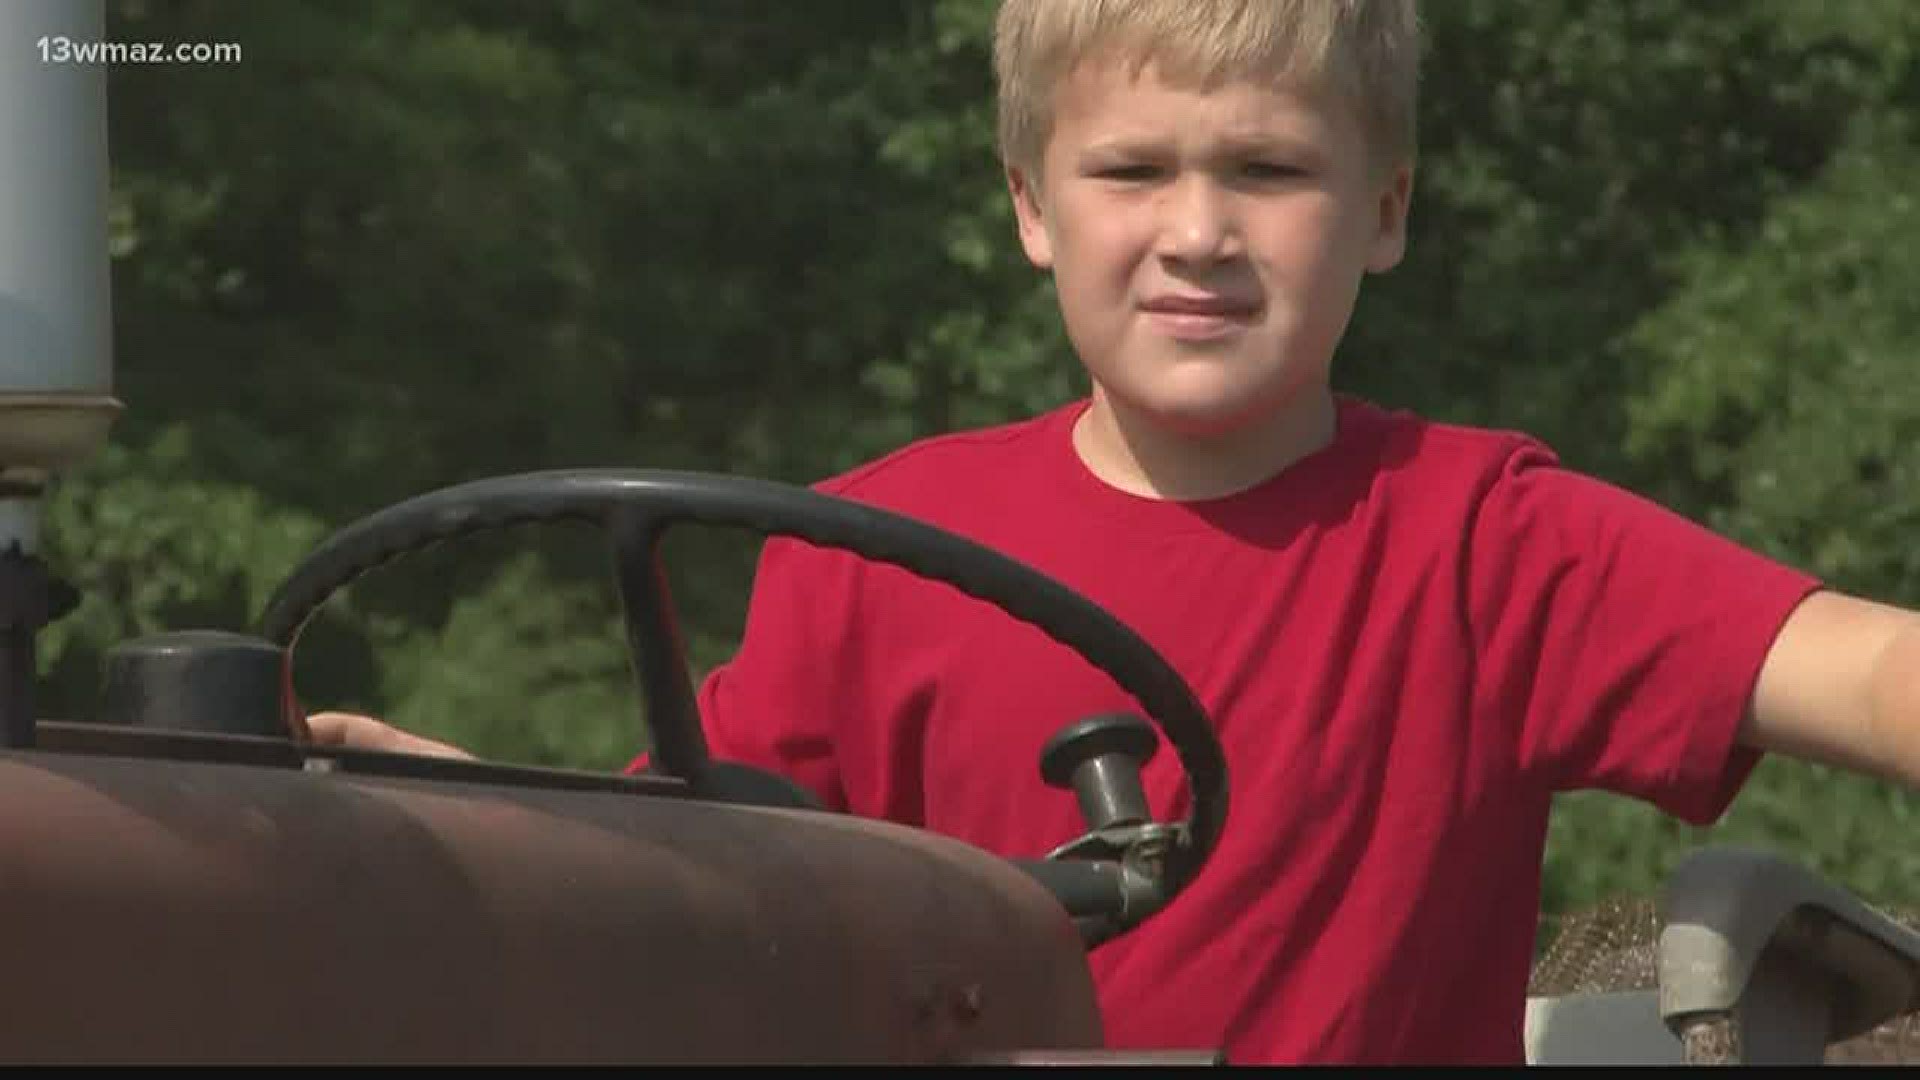 His name is Grady, and let's just say he's caught the farming passion at a young age.